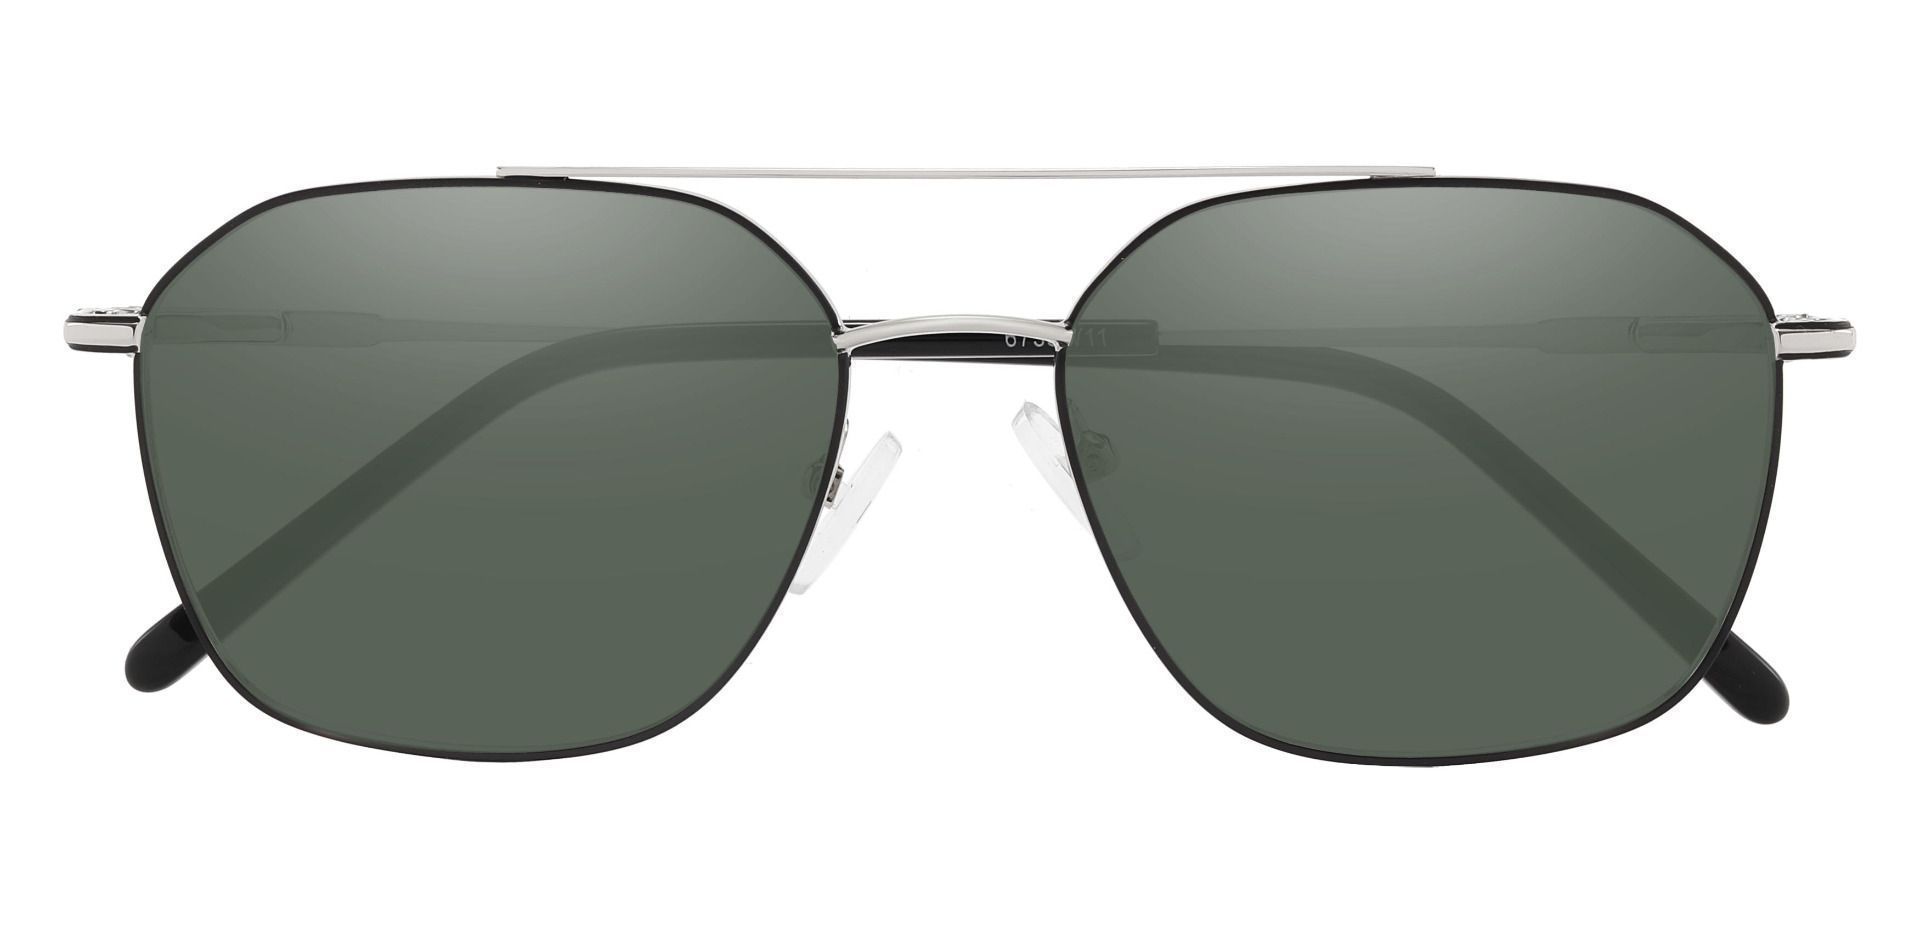 Harvey Aviator Lined Bifocal Sunglasses - Silver Frame With Green Lenses